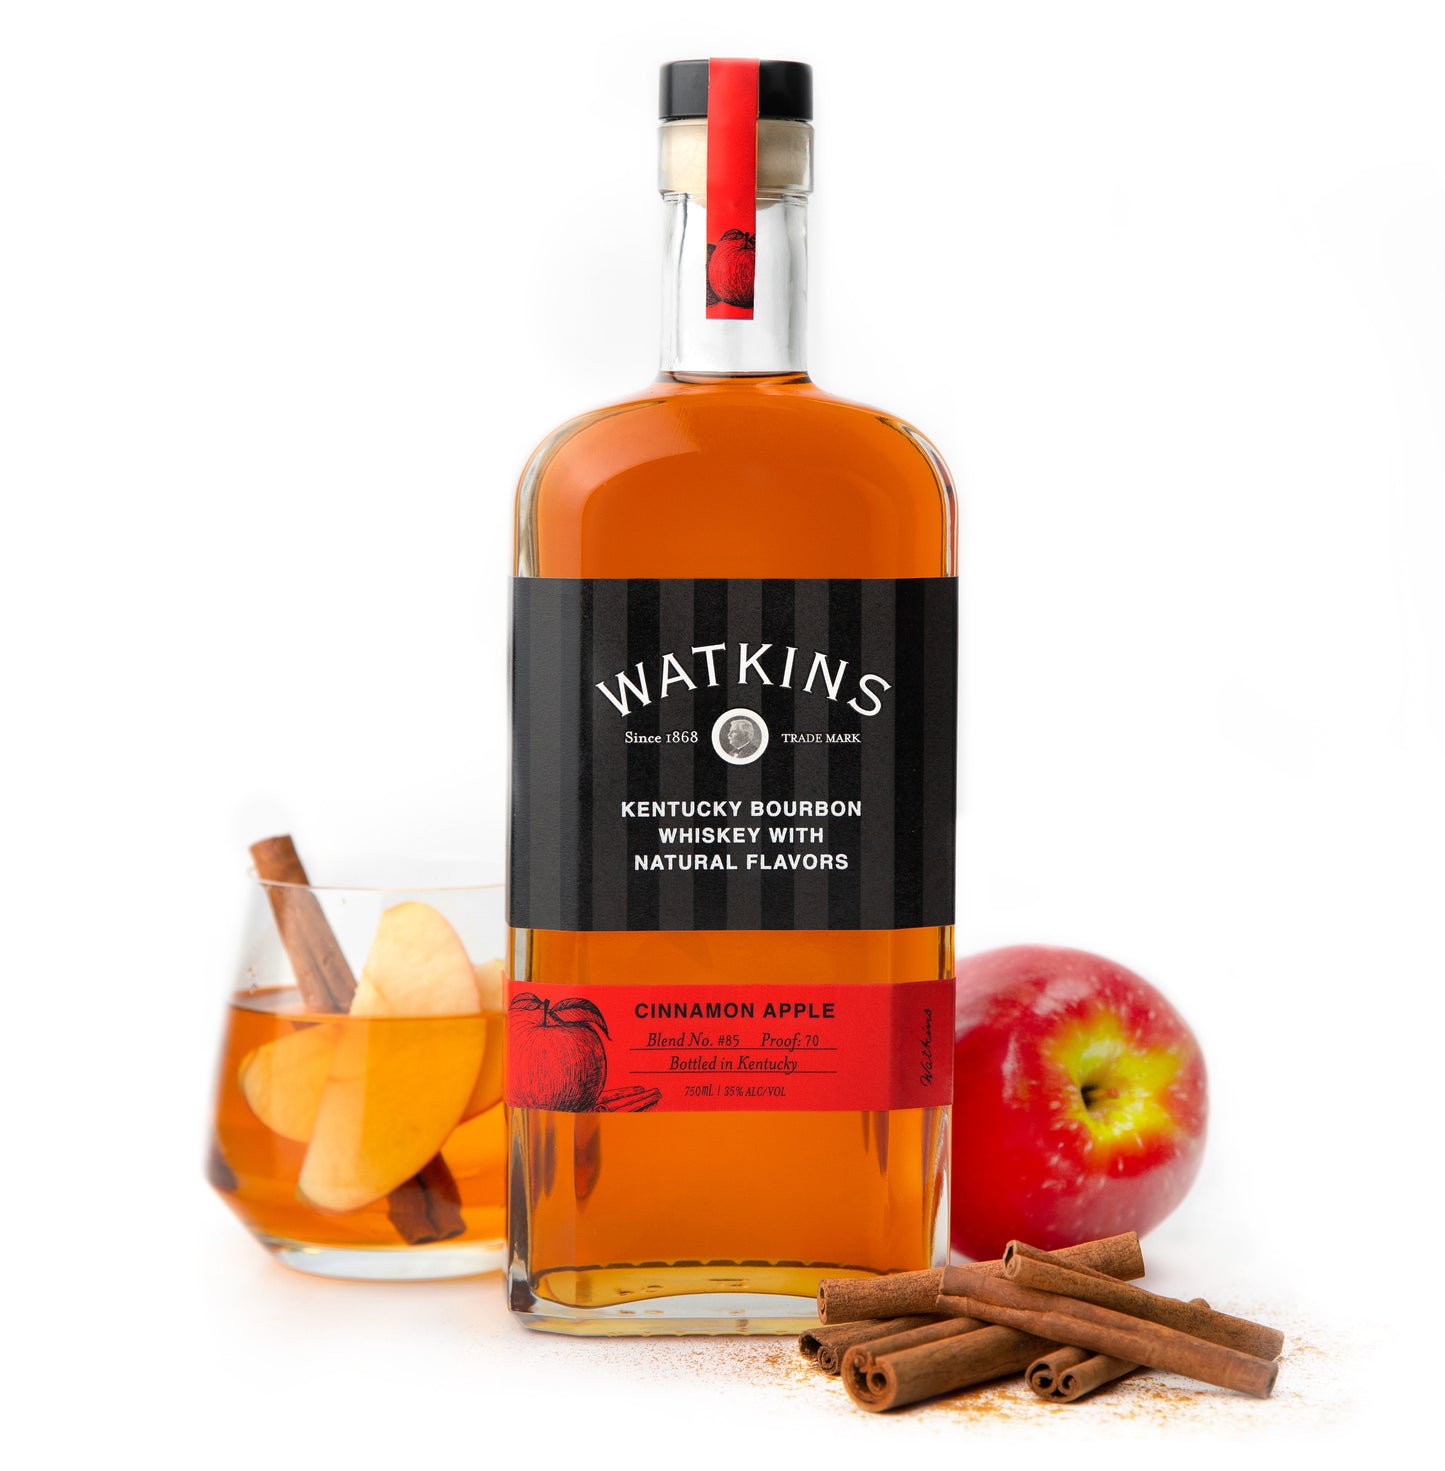 Cinnamon Apple Bourbon Whiskey with Natural Flavors